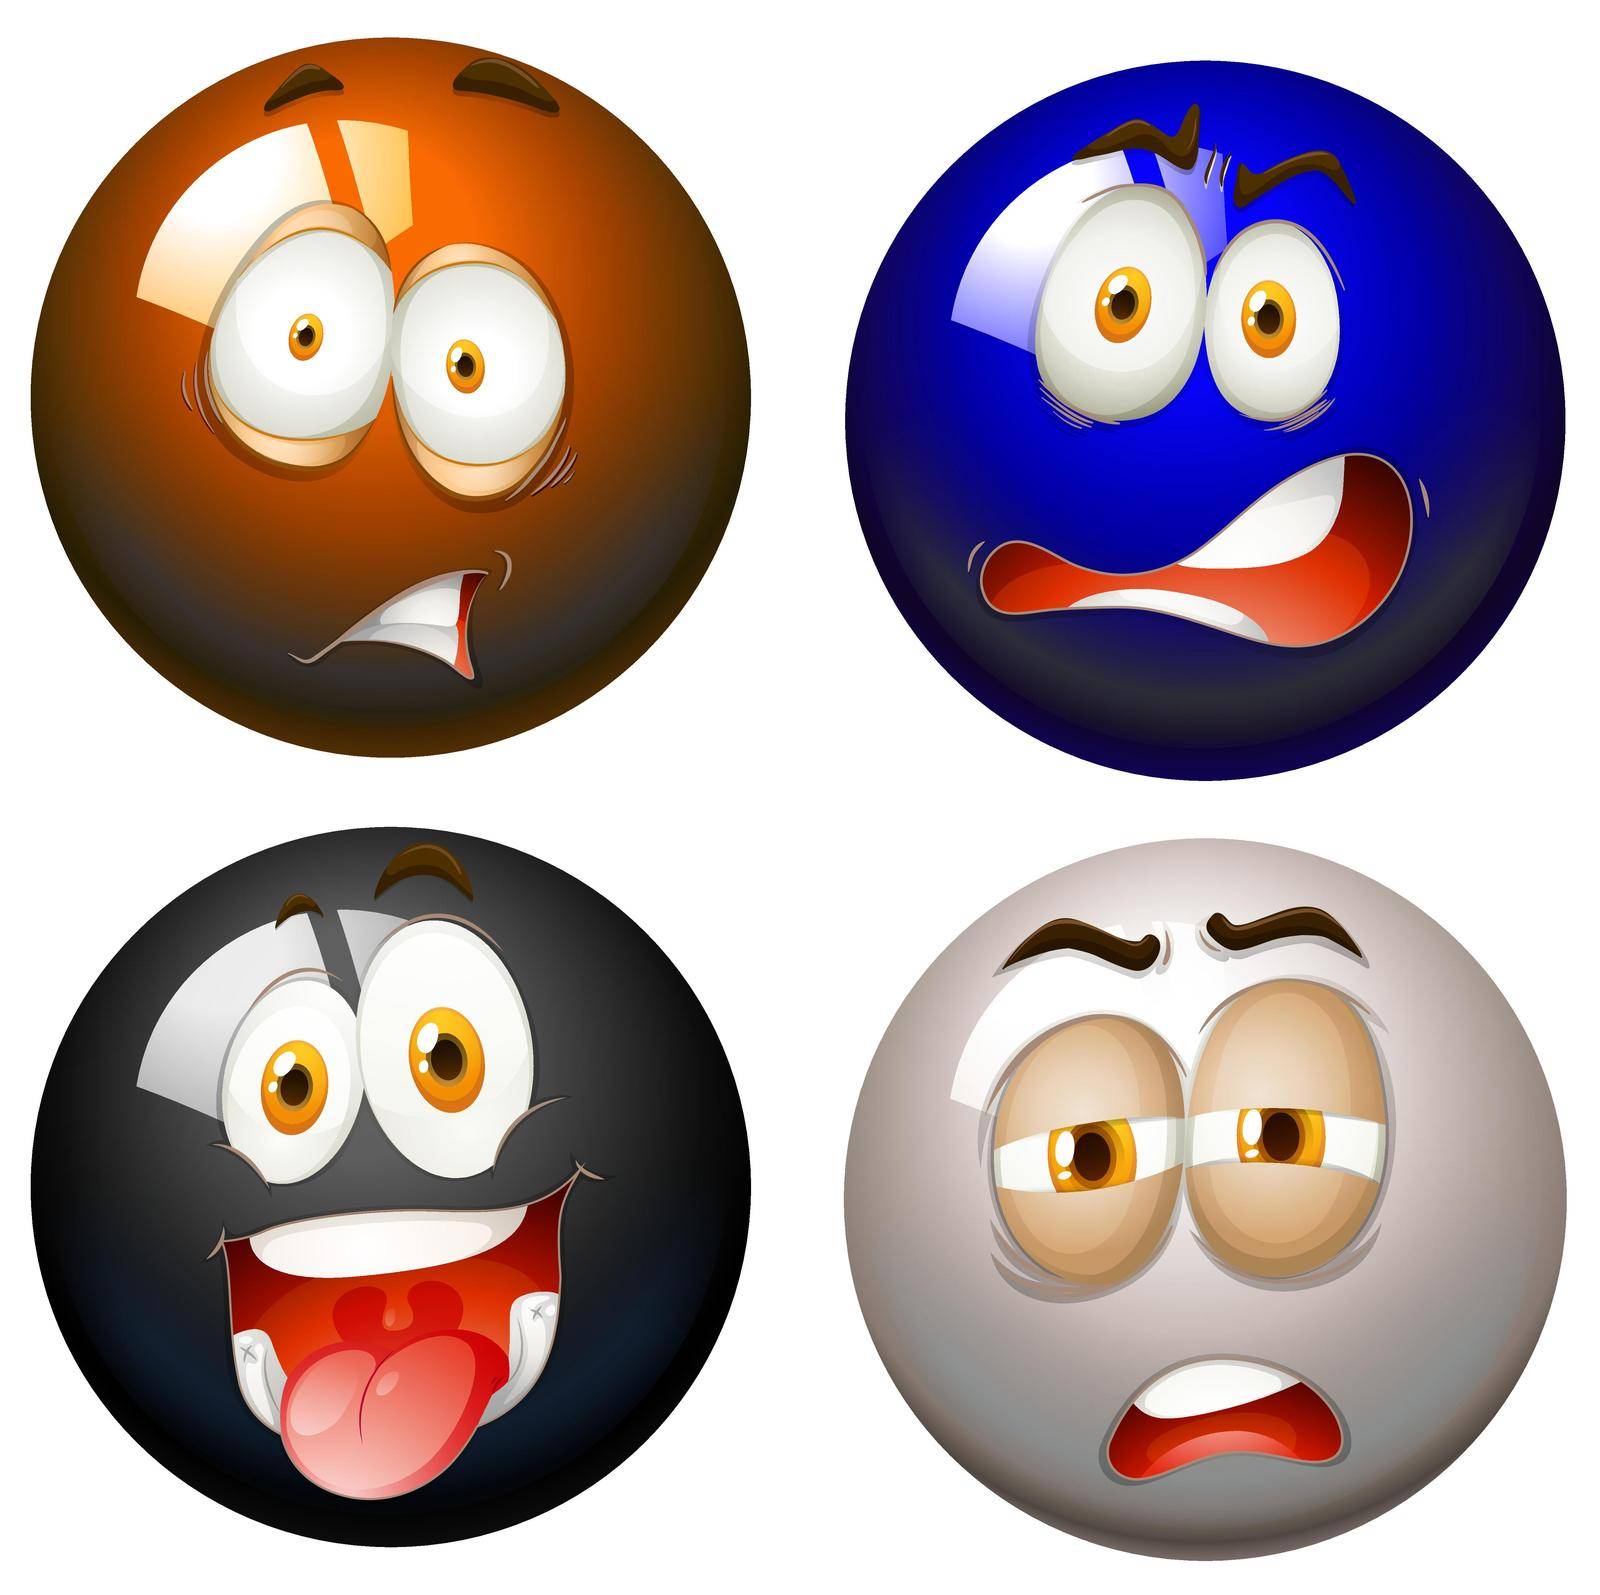 Snooker balls with facial expressions illustration